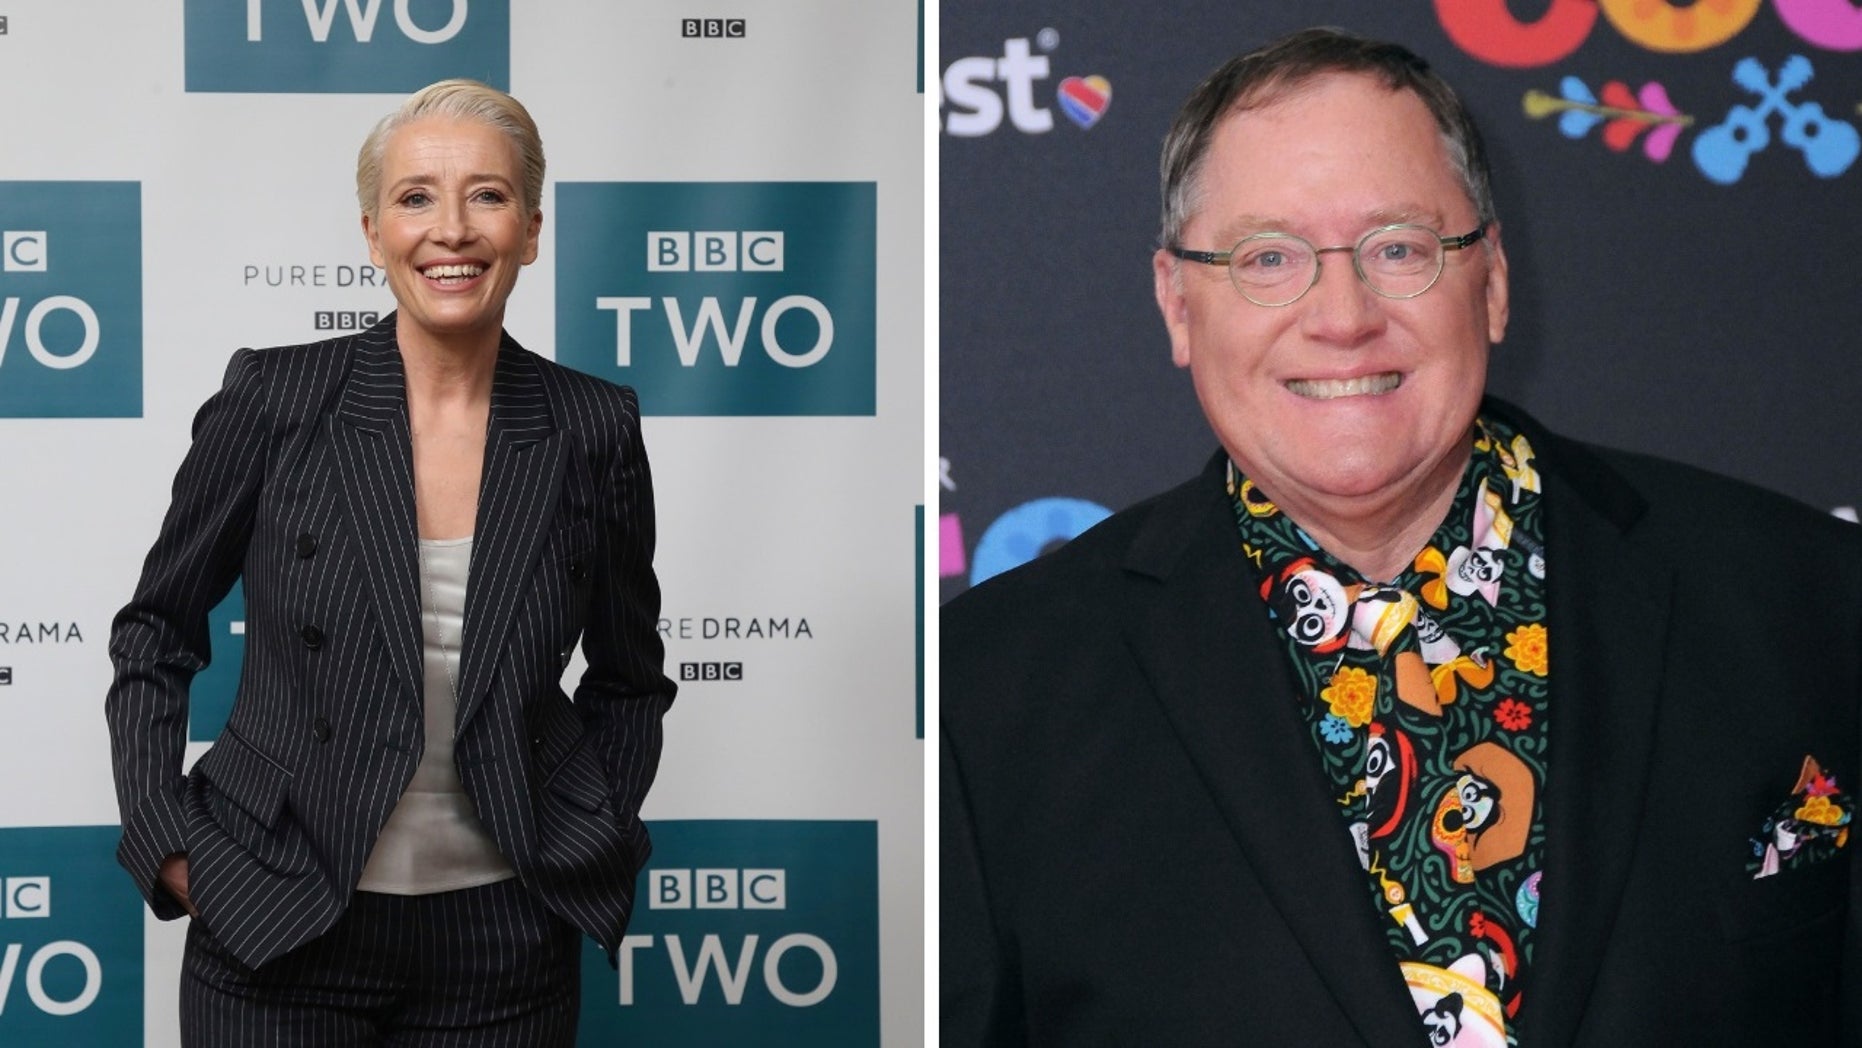 Emma Thompson [left] wrote in a letter why she will not work with Pixar's former executive, John Lasseter [right] and was retiring from the animated film 